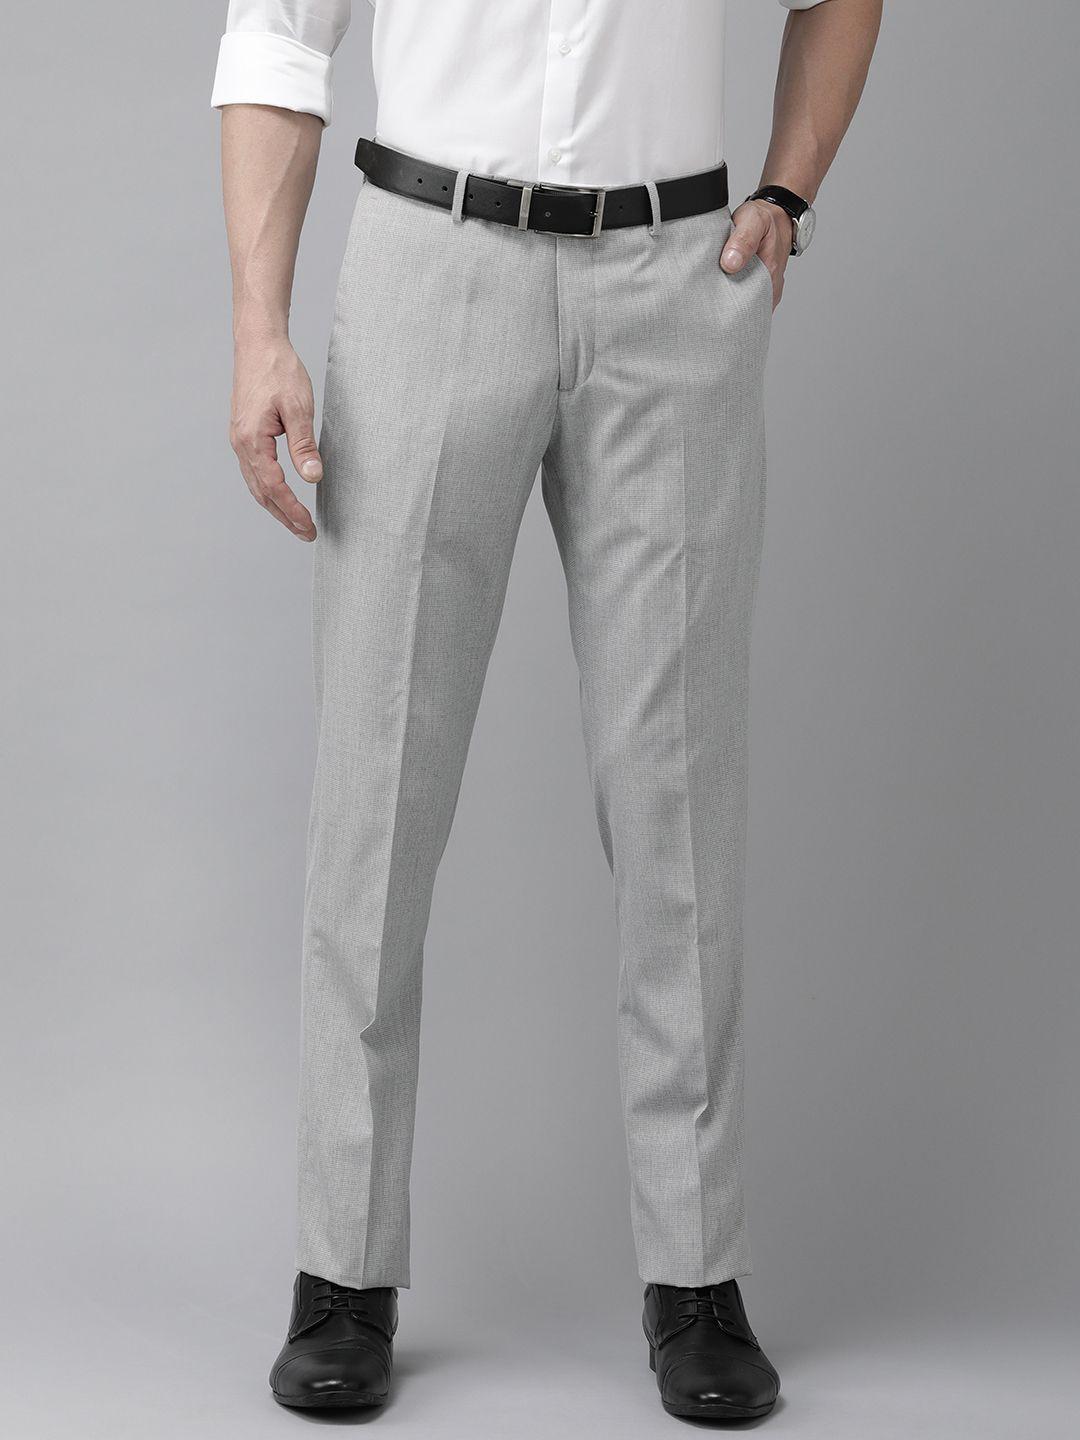 arrow-men-grey-checked-tailored-formal-trousers